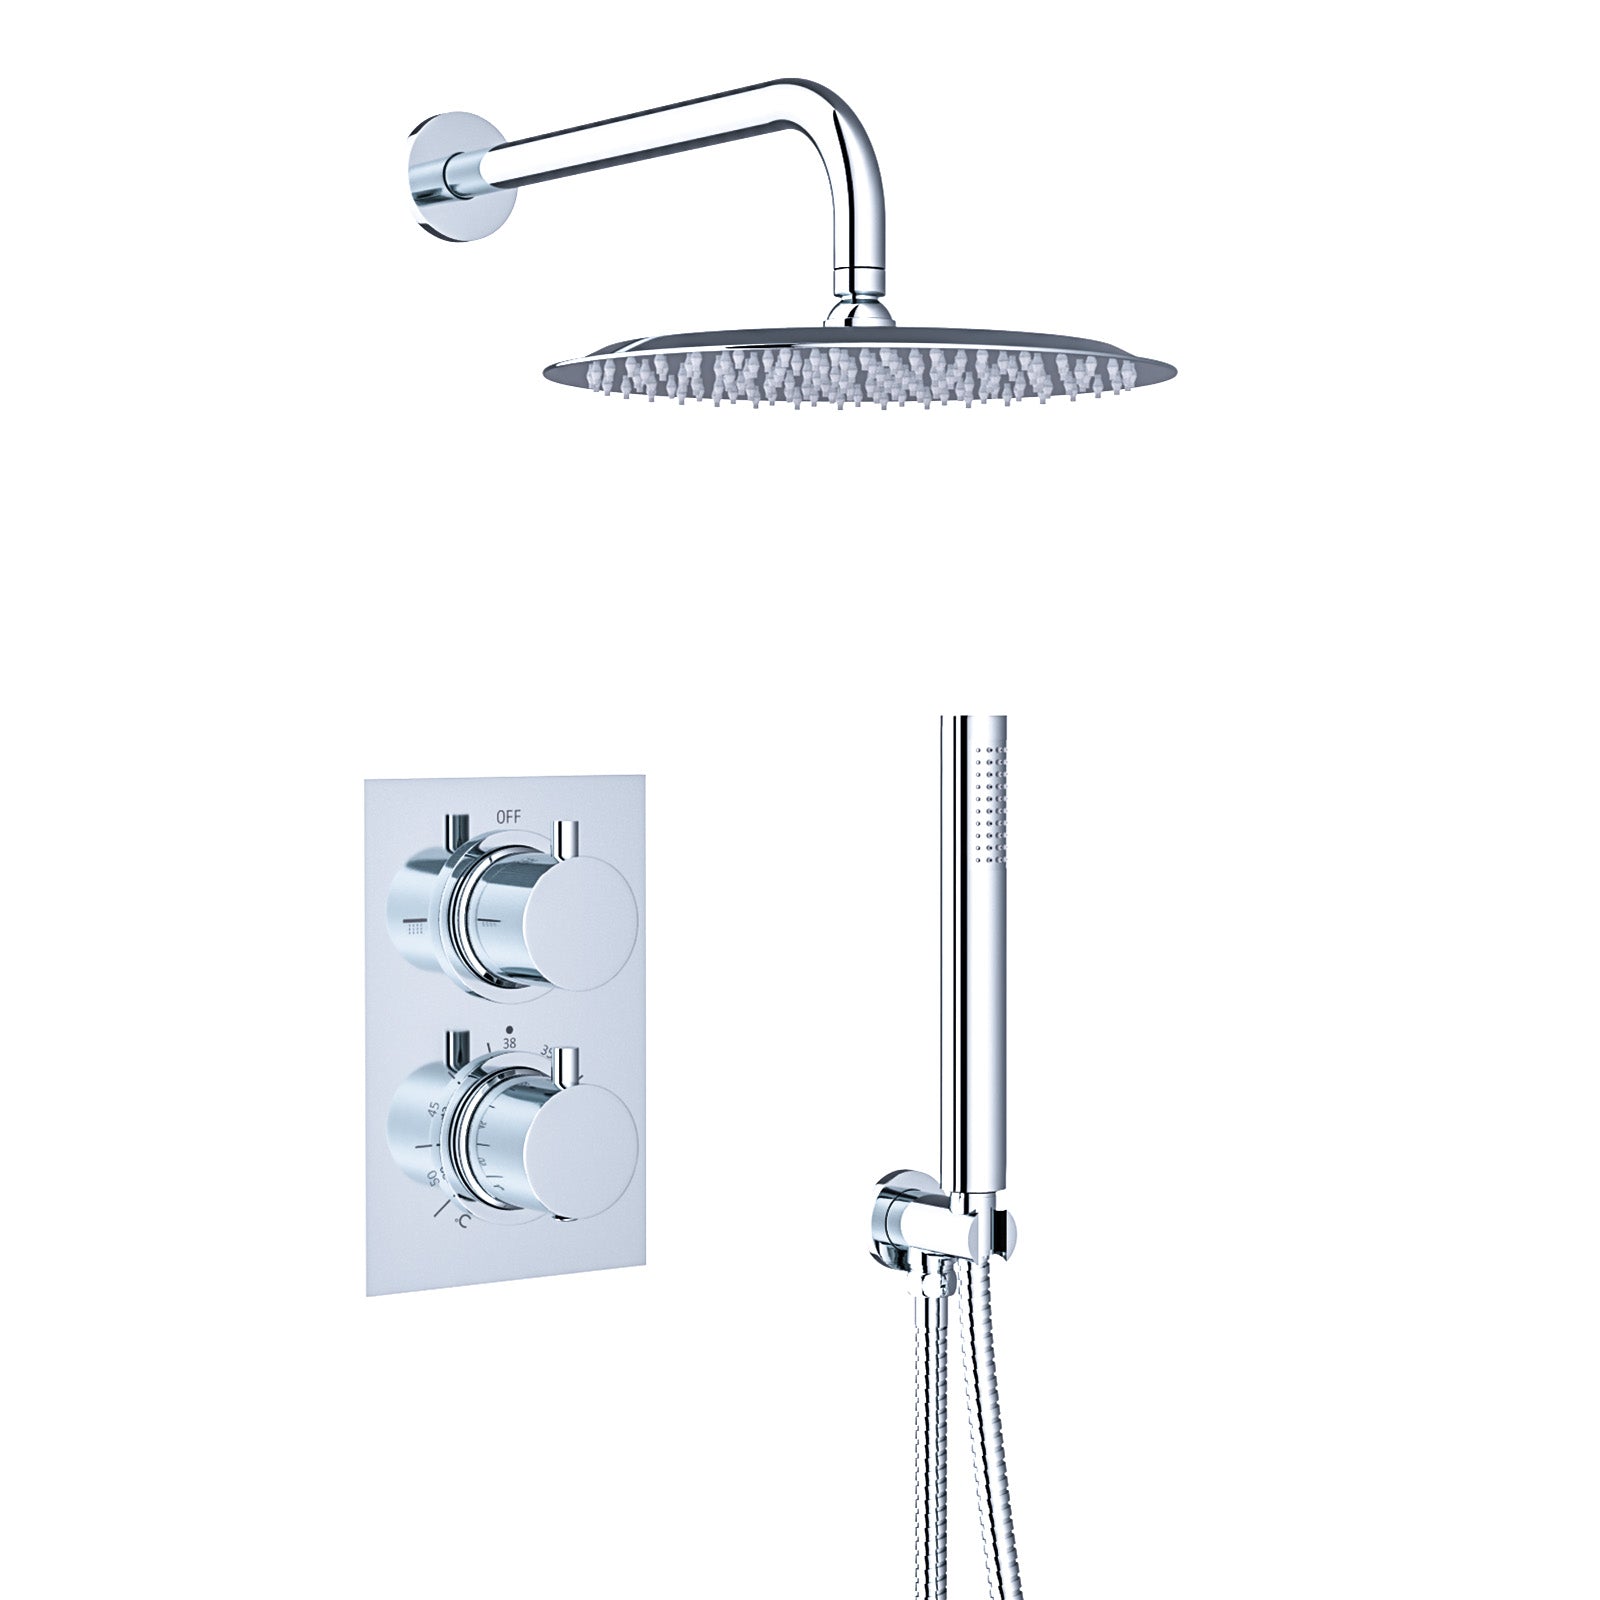 Folke 2 Dial 2 Way Round or Square Concealed Thermostatic Shower Mixer Valve, Shower Head, and Handset Chrome or Black